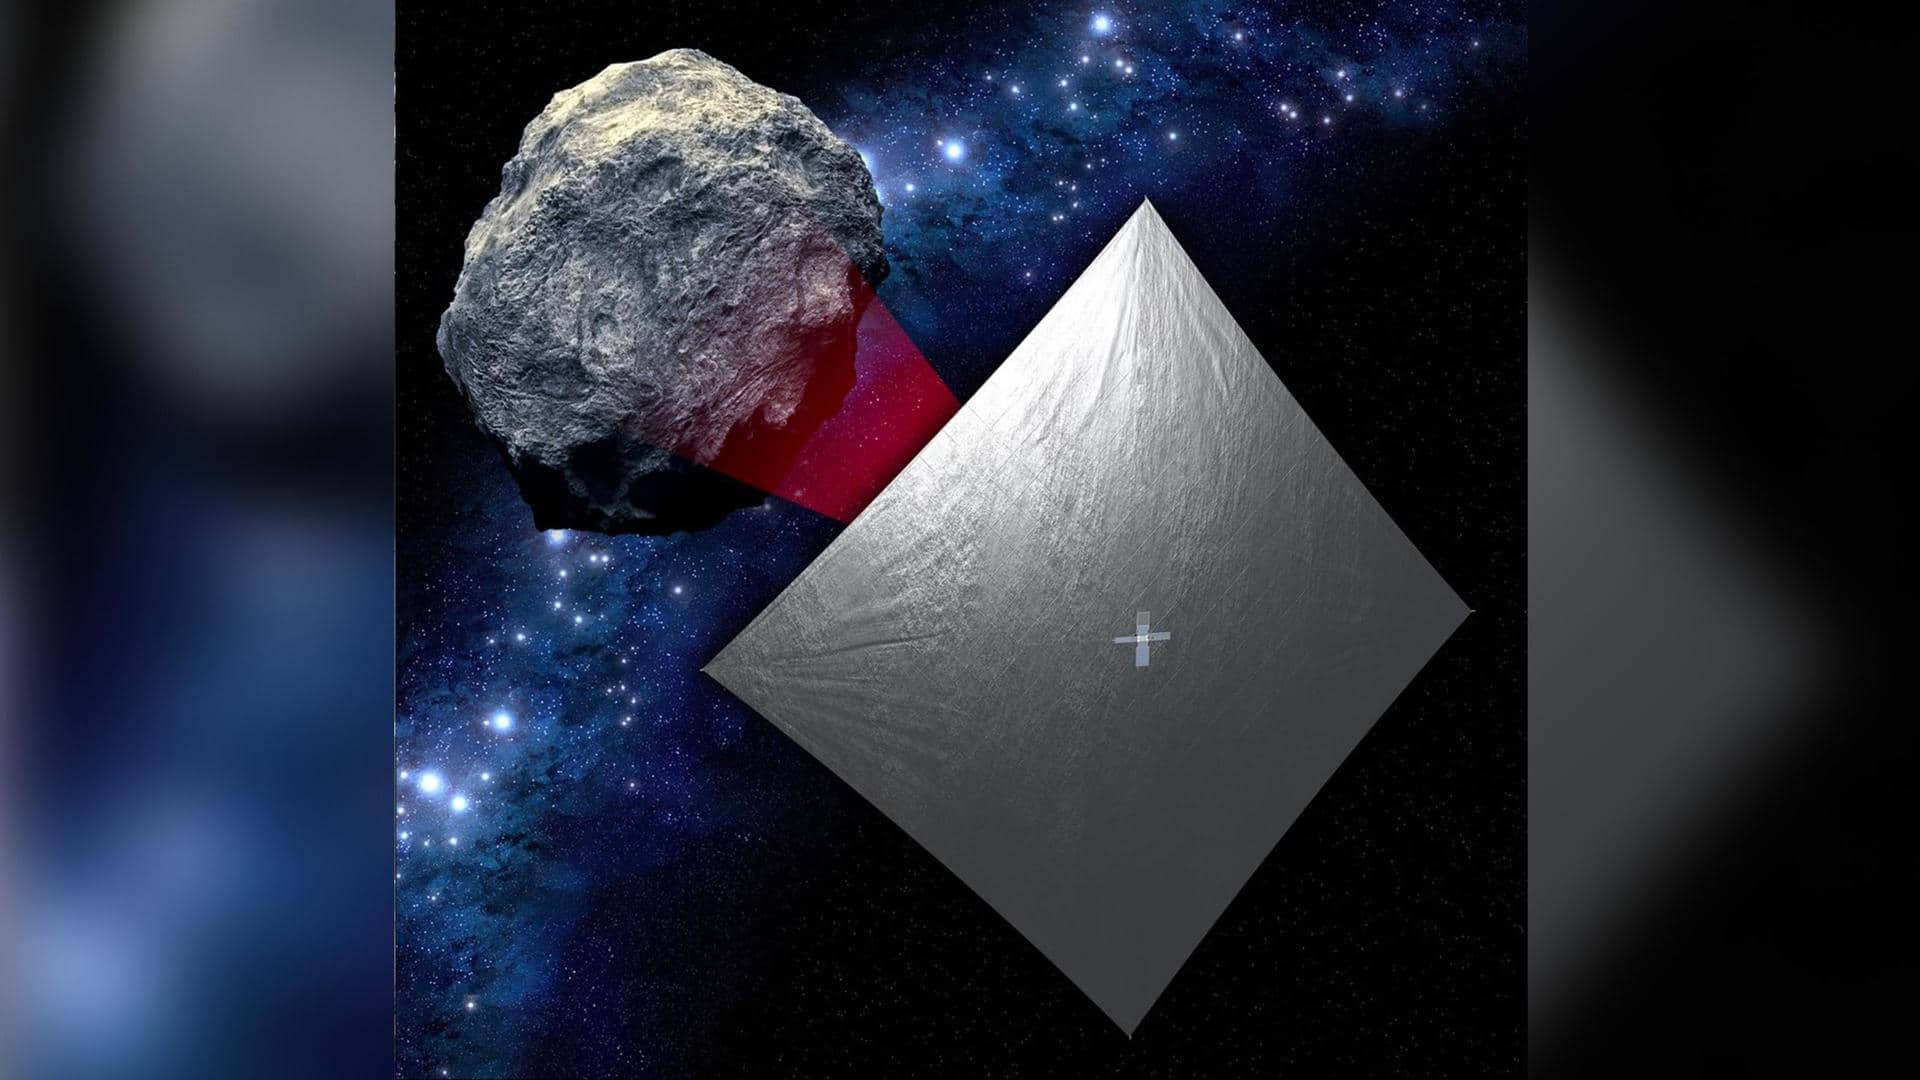 Asteroid-bound CubeSat loses contact after separating from NASA's Artemis 1